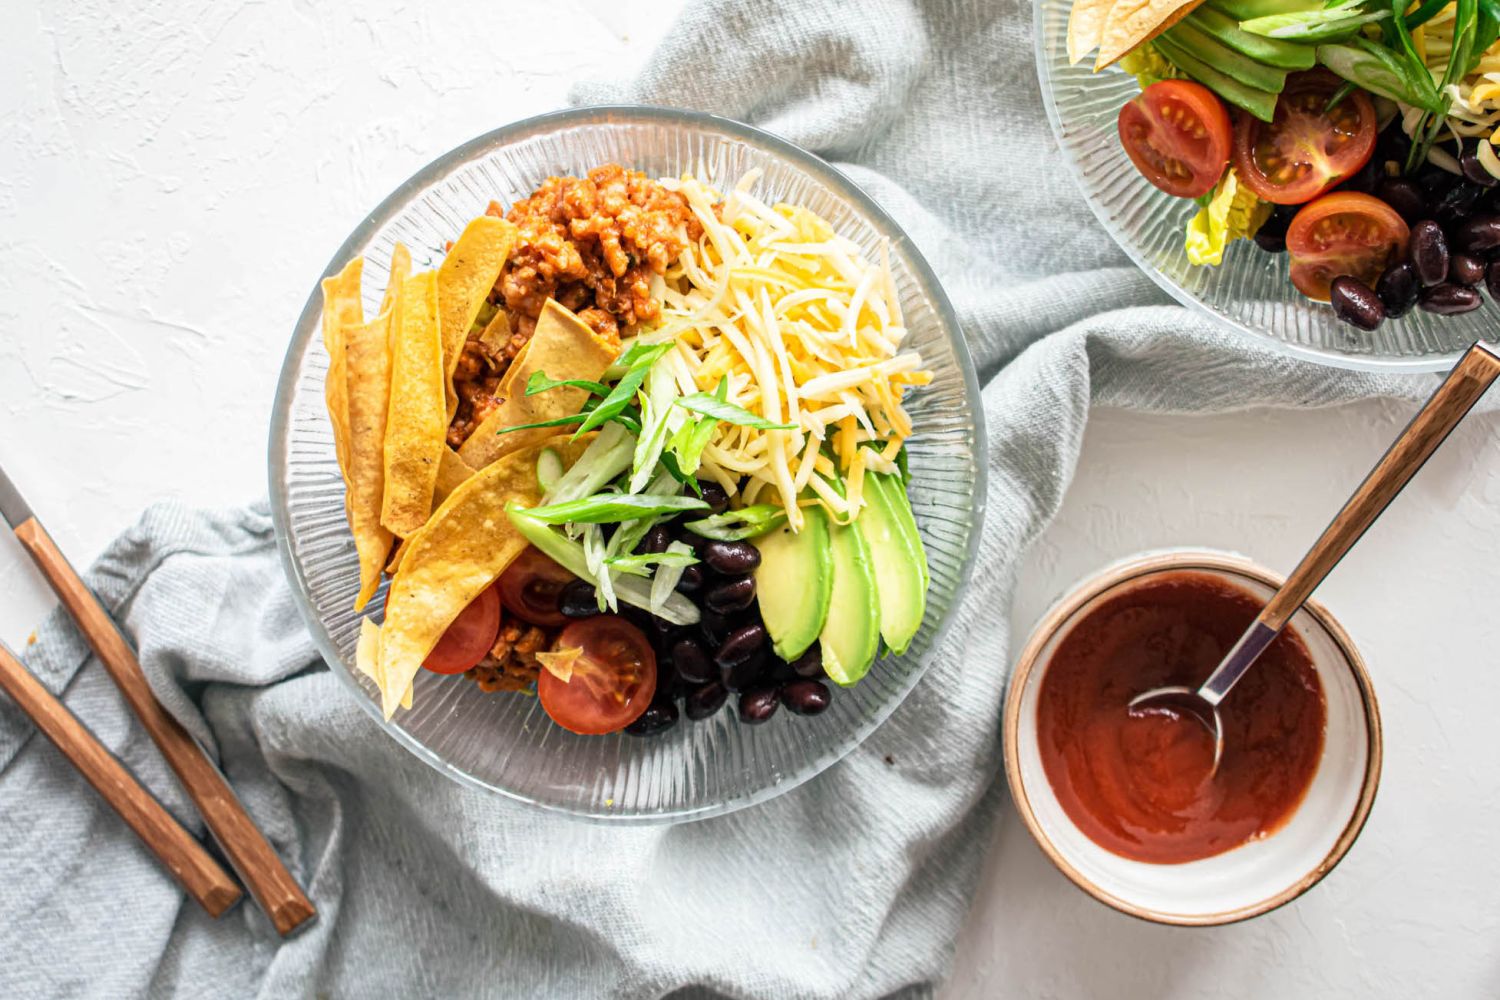 Turkey taco salad with ground turkey, tomatoes, black beans, cheddar cheese, and crispy tortilla strips.